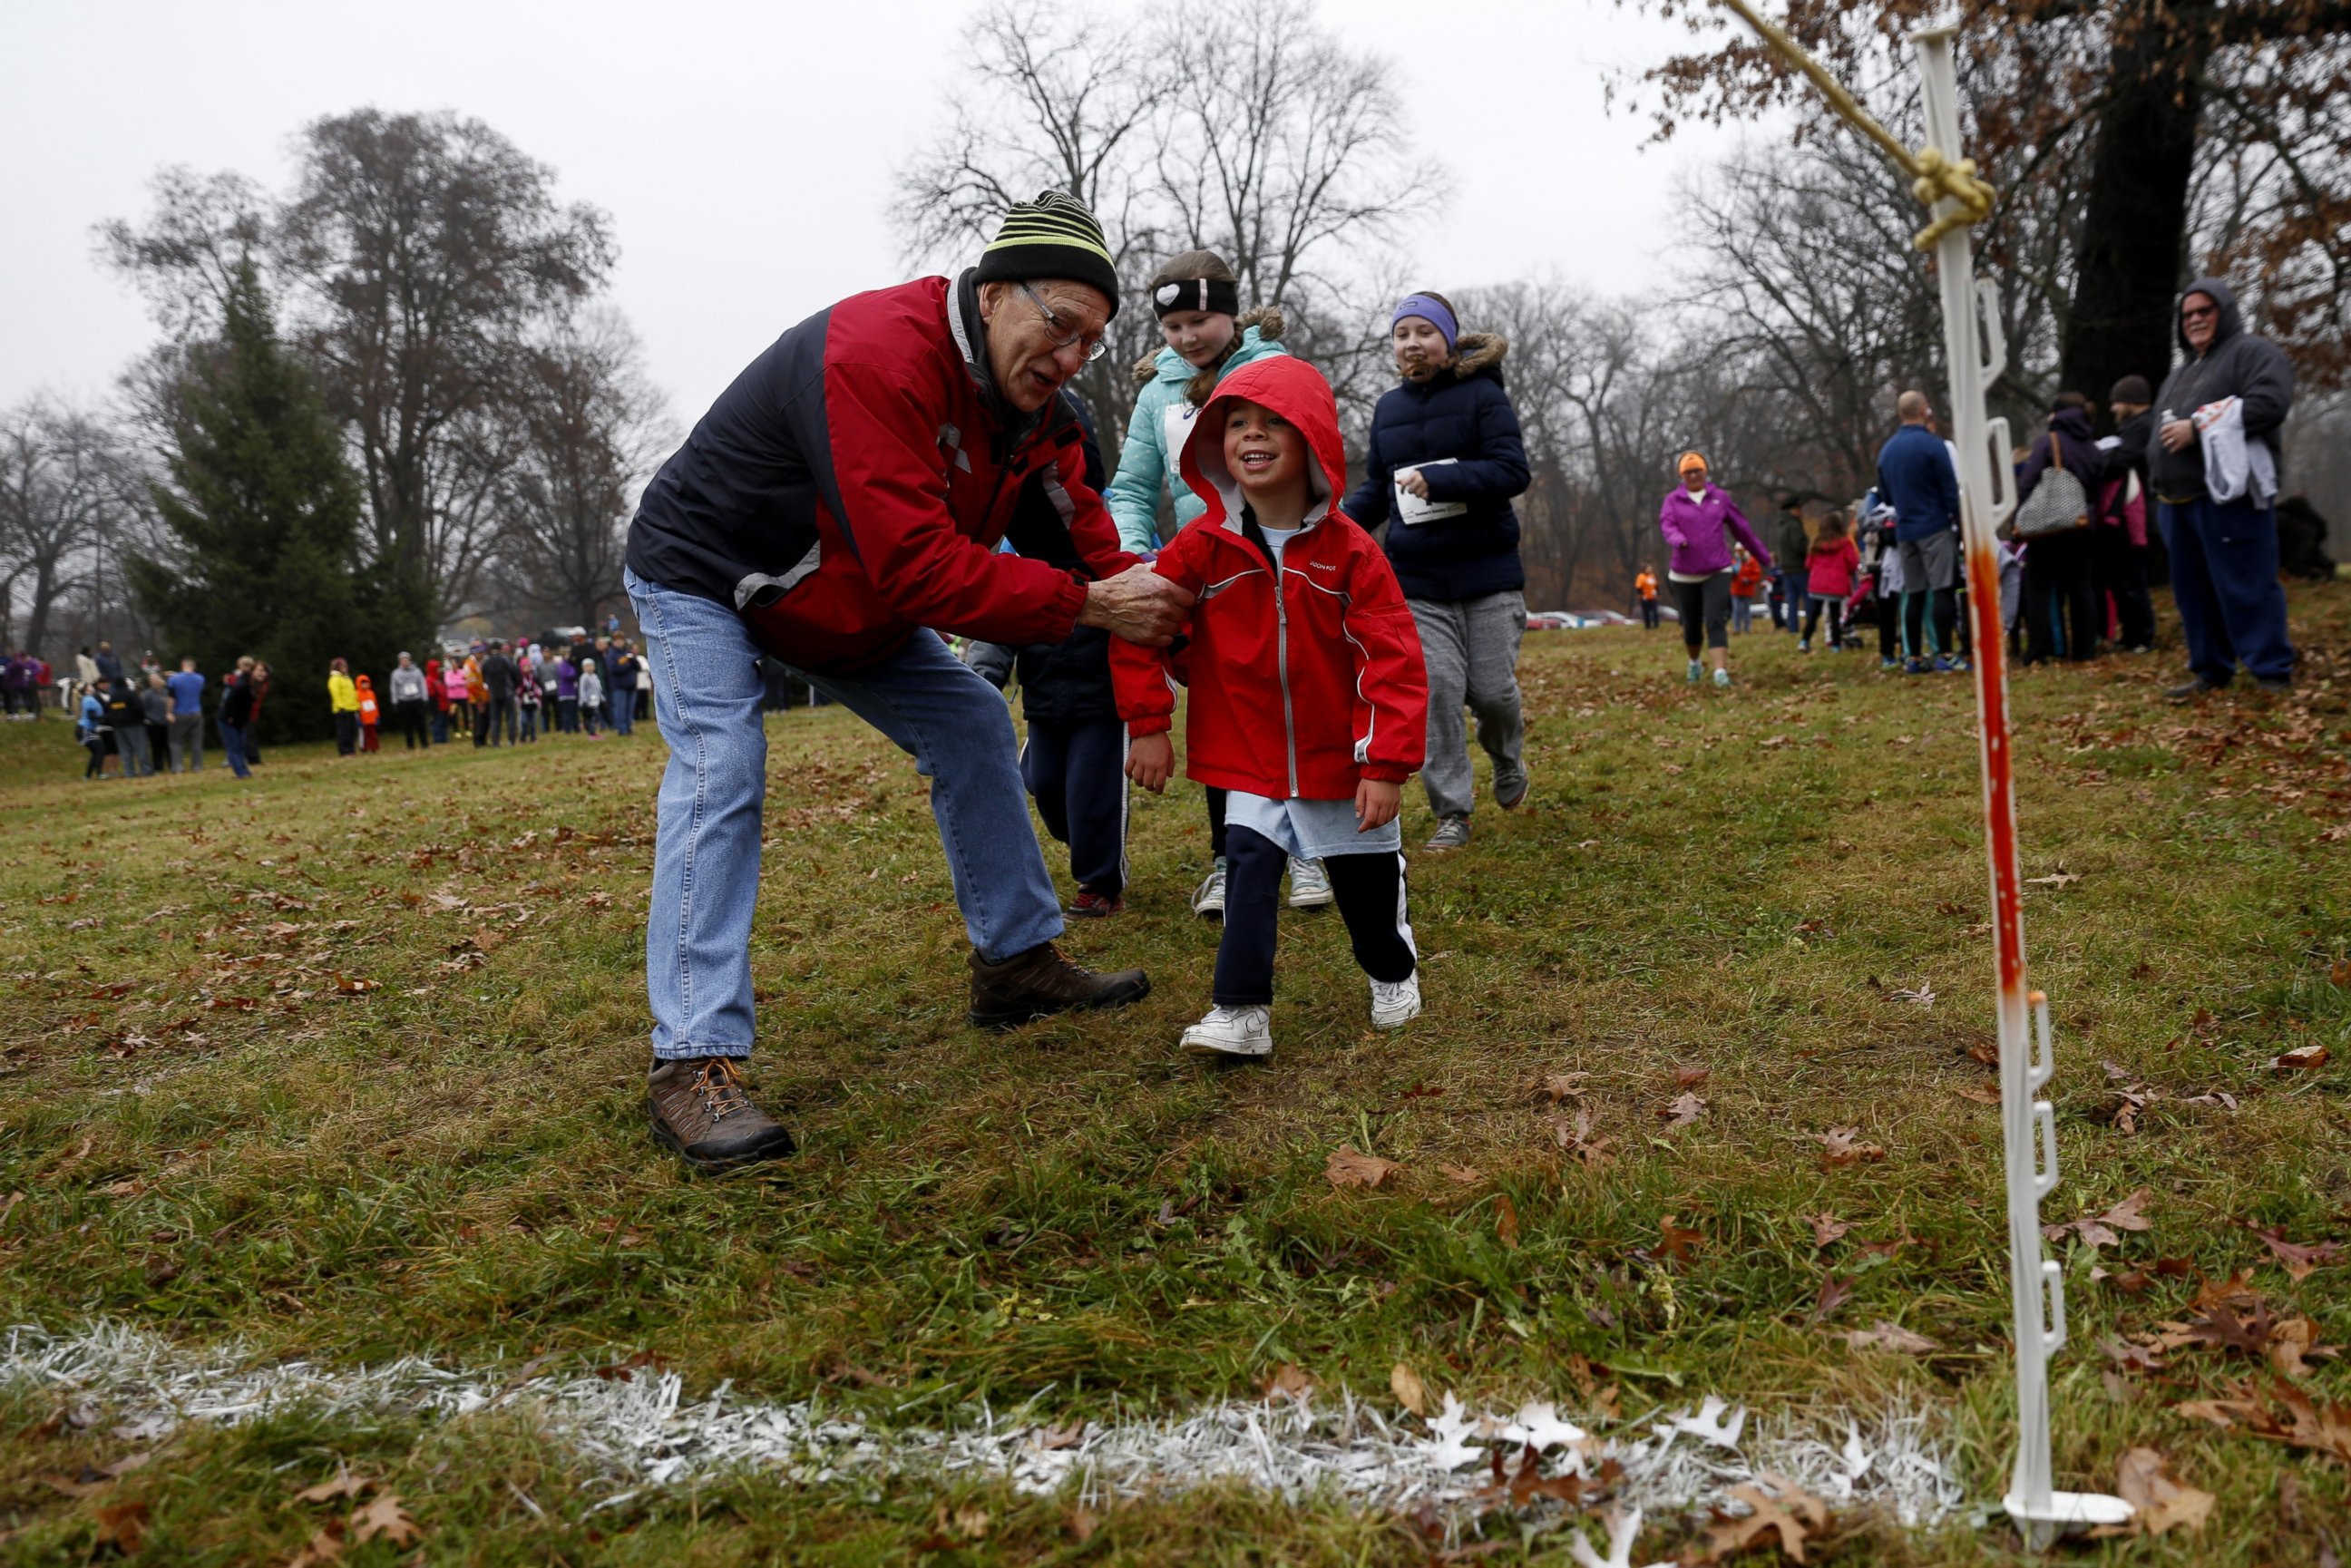 PHOTO: From left, Jim Loria, of Swartz Creek, helps Gabriel Riley, 4, of Burton, to the finish line during the 60th annual Thanksgiving Day Turkey Trot on Thursday, Nov. 24, 2016, at Mott Park in Flint, Mich.